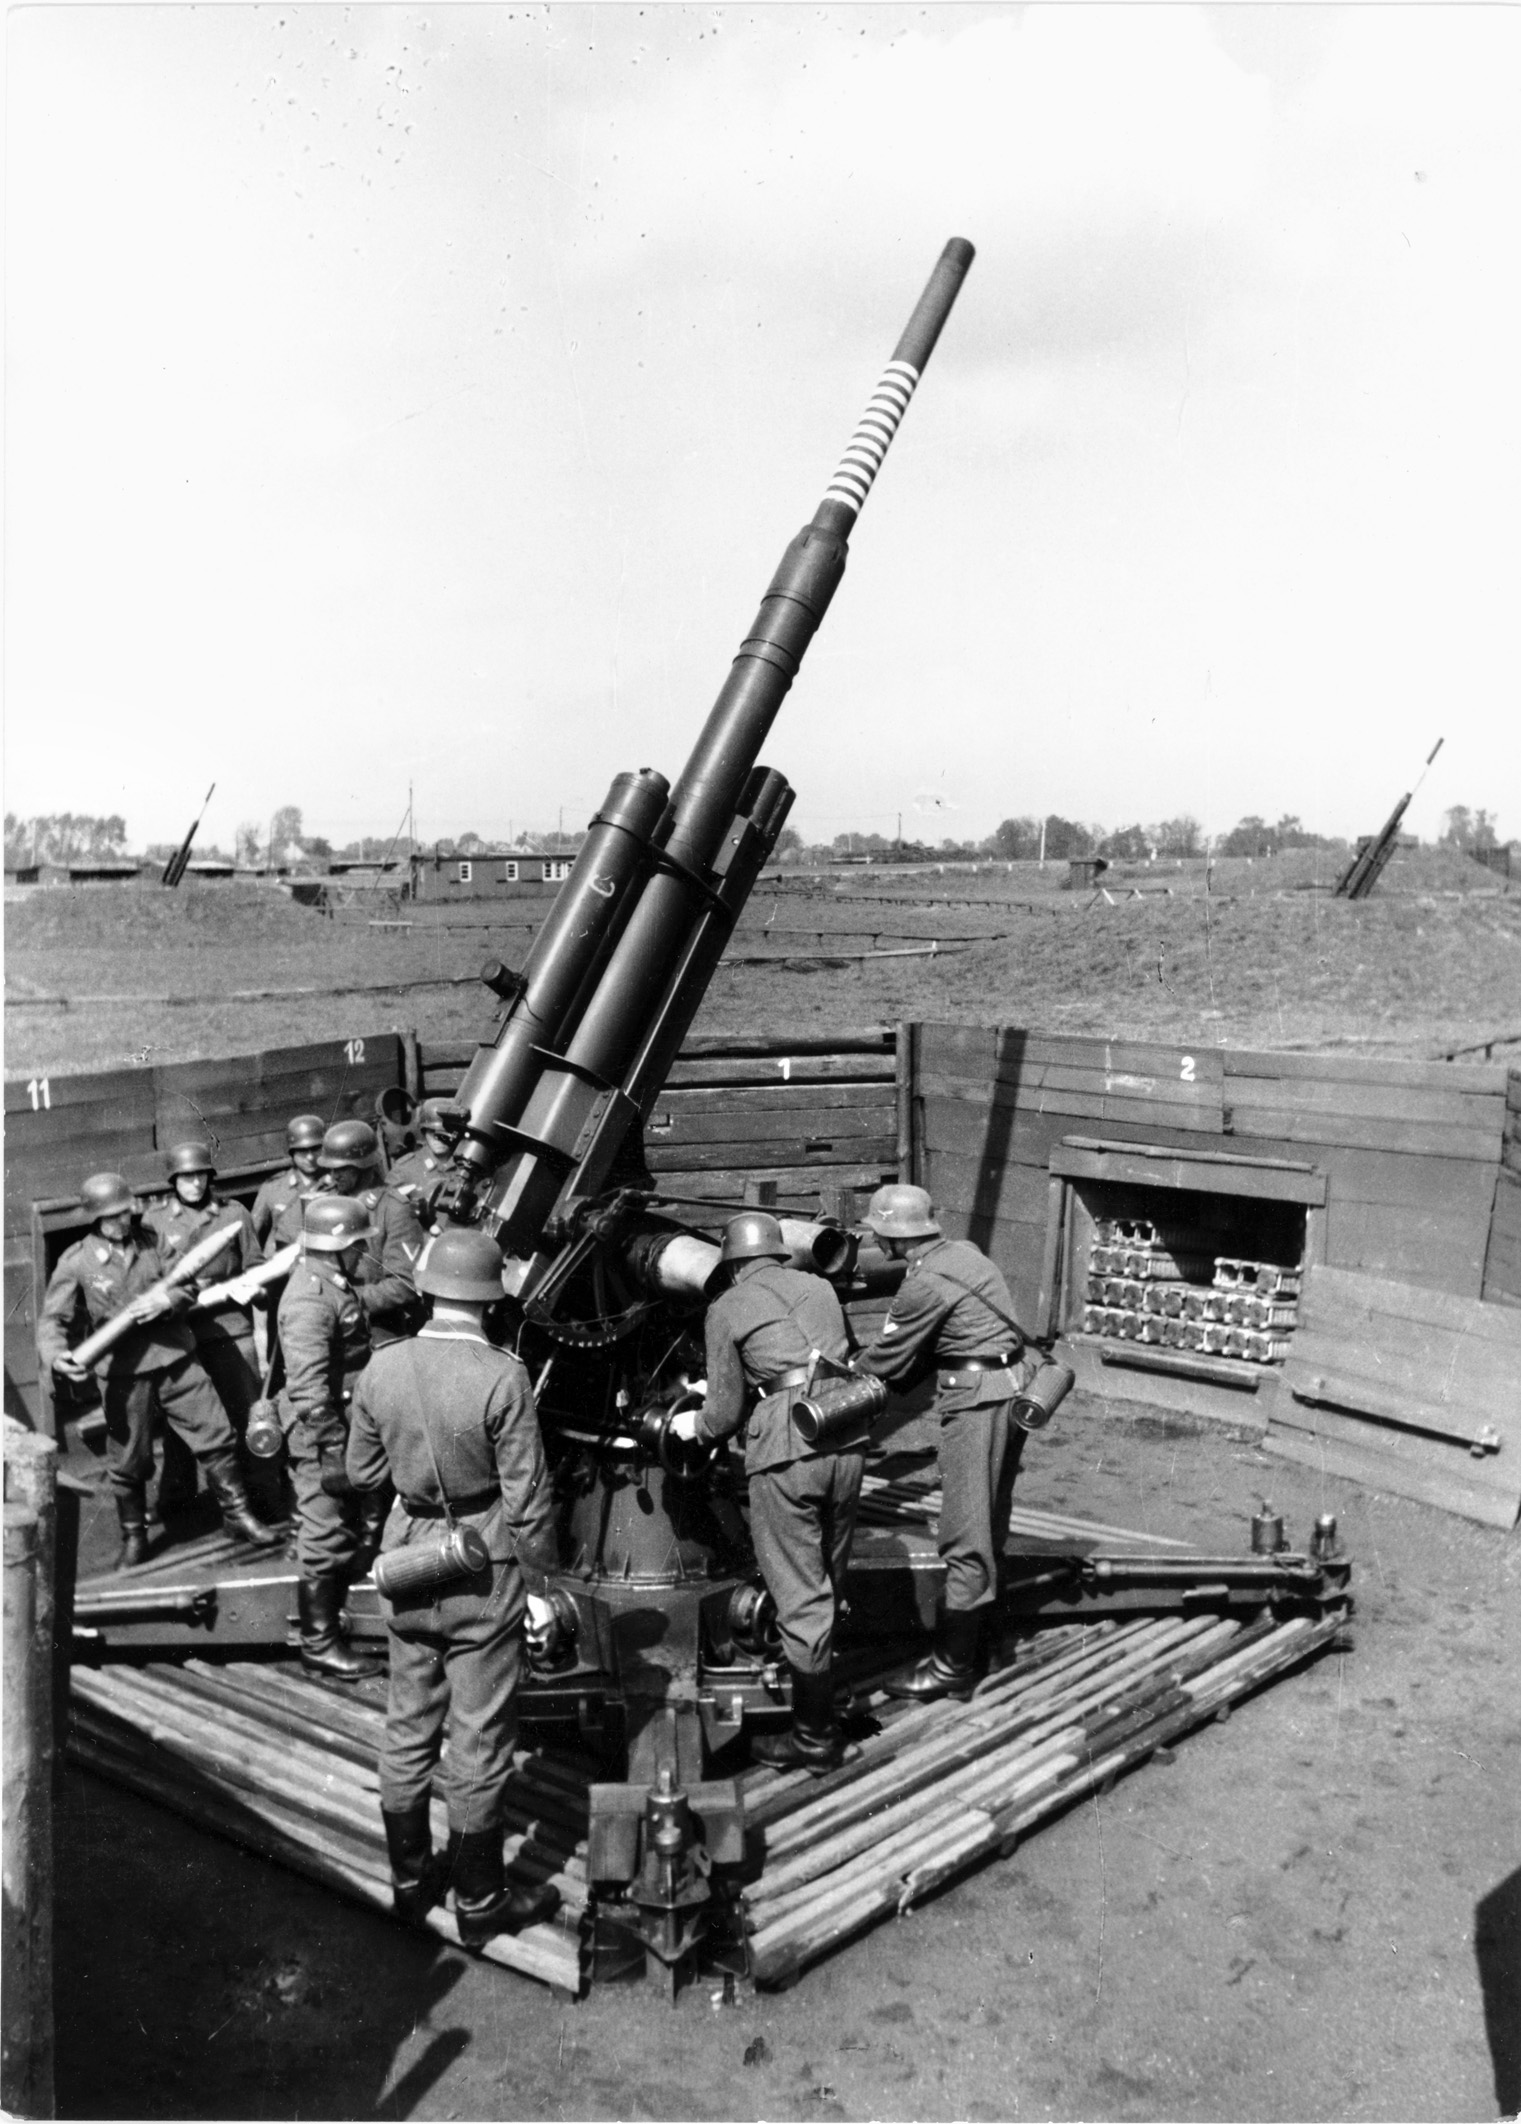 In a field bristling with anti-aircraft weapons, a German gun crew practices loading an 88mm gun. As the war went badly for Germany and air raids became more frequent, experienced gunners such as Gunther became more in demand.